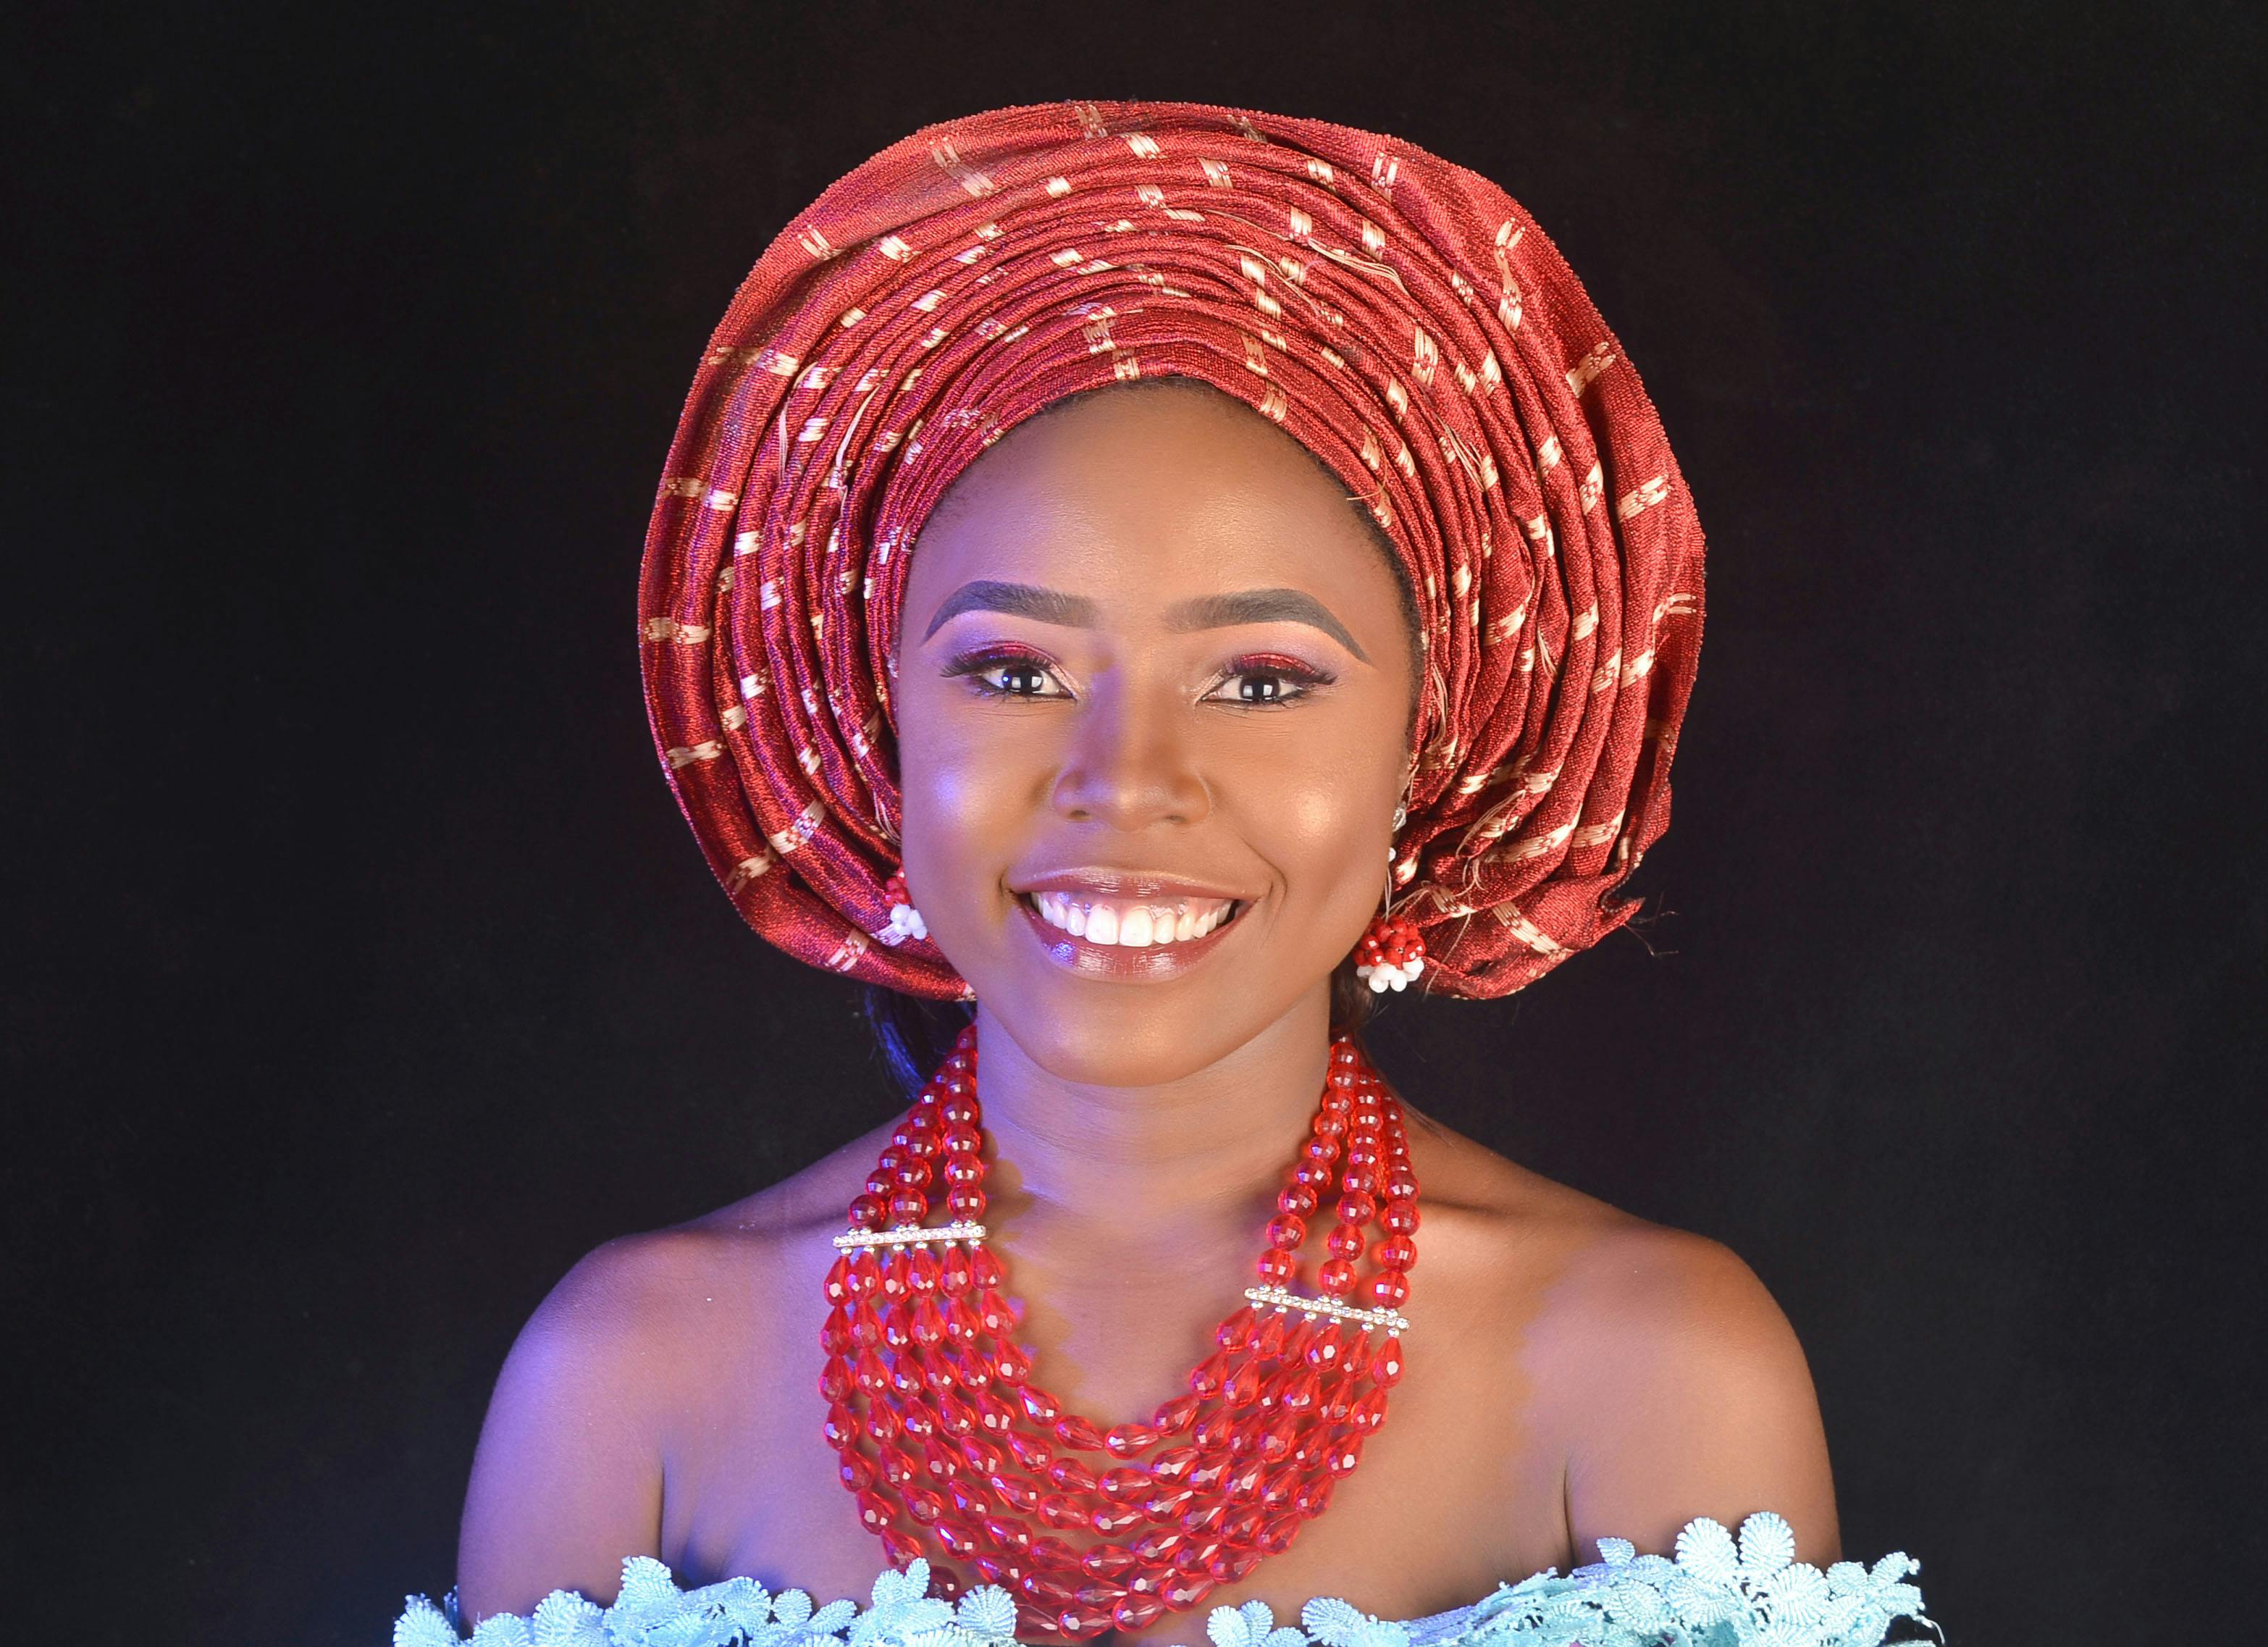 Free stock photo of Hosanna Makeover, Red beads and Gele Photoshoot, Traditional Attire and Naija Weddings